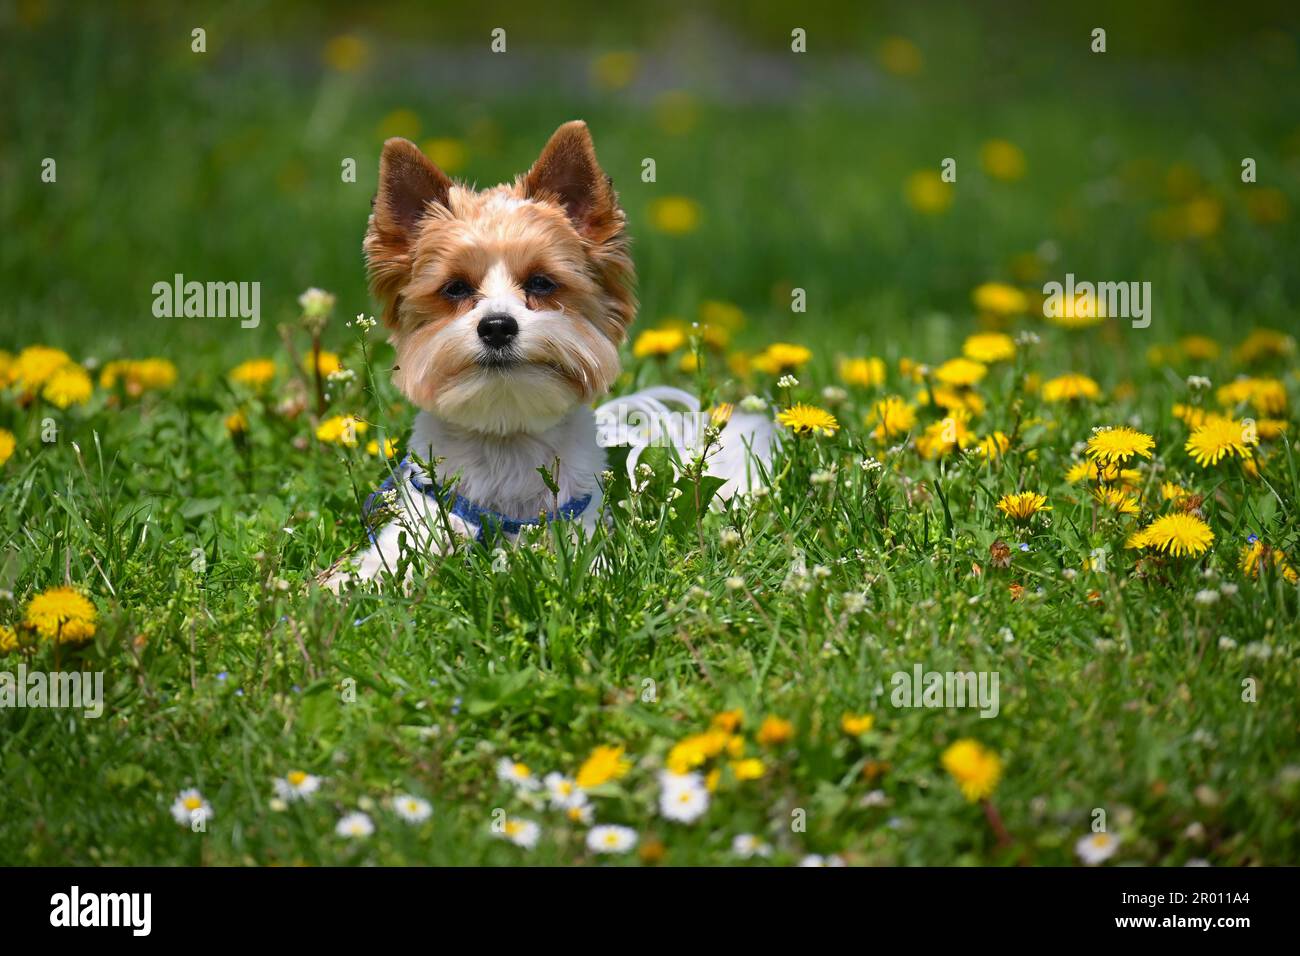 Dog on the grass. Pet - Yorkshire terrier biewer. Stock Photo